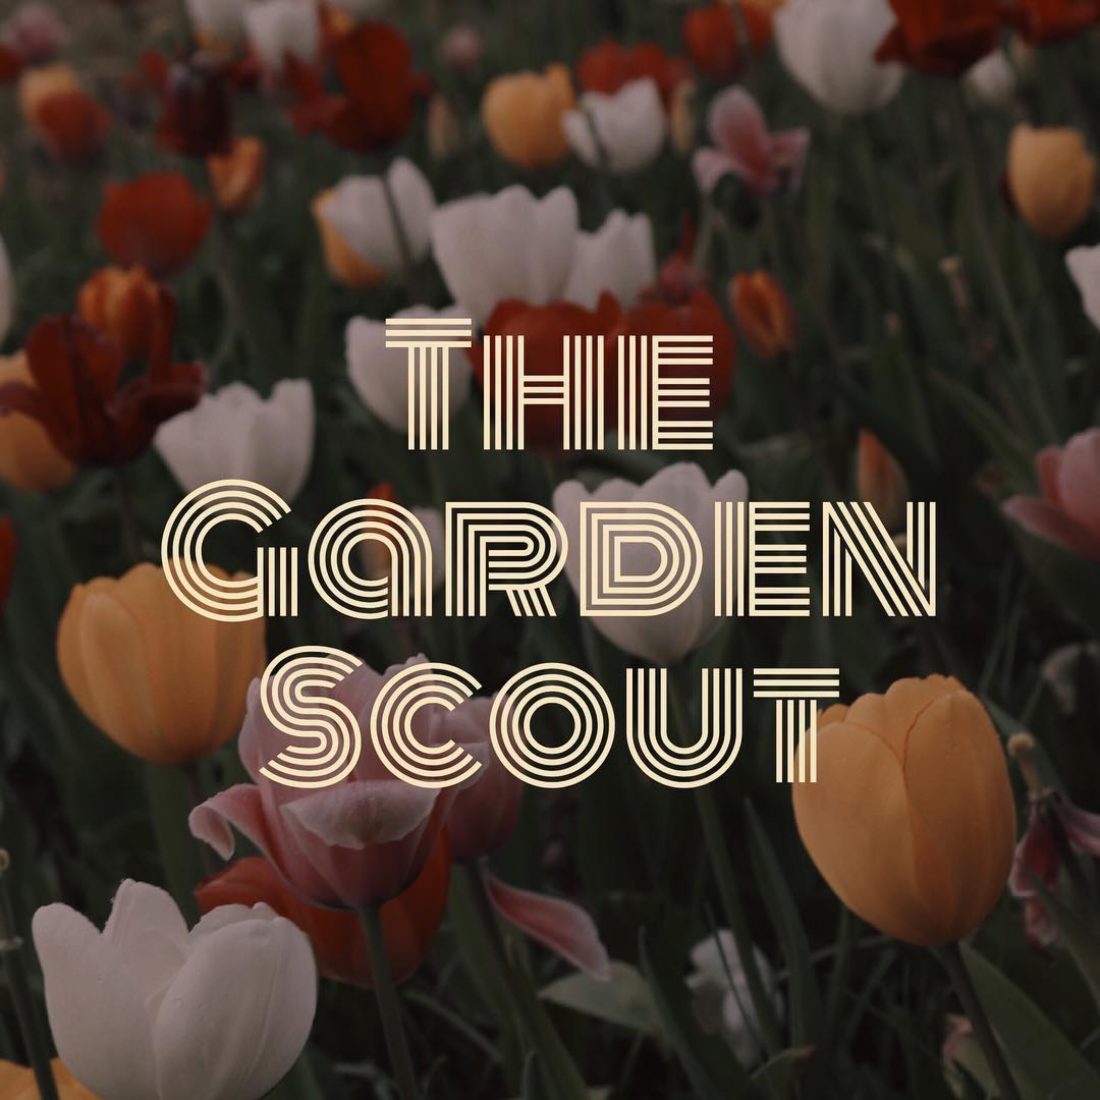 Why I landscape - a happy career story.  Travis Cox - The Garden Scout